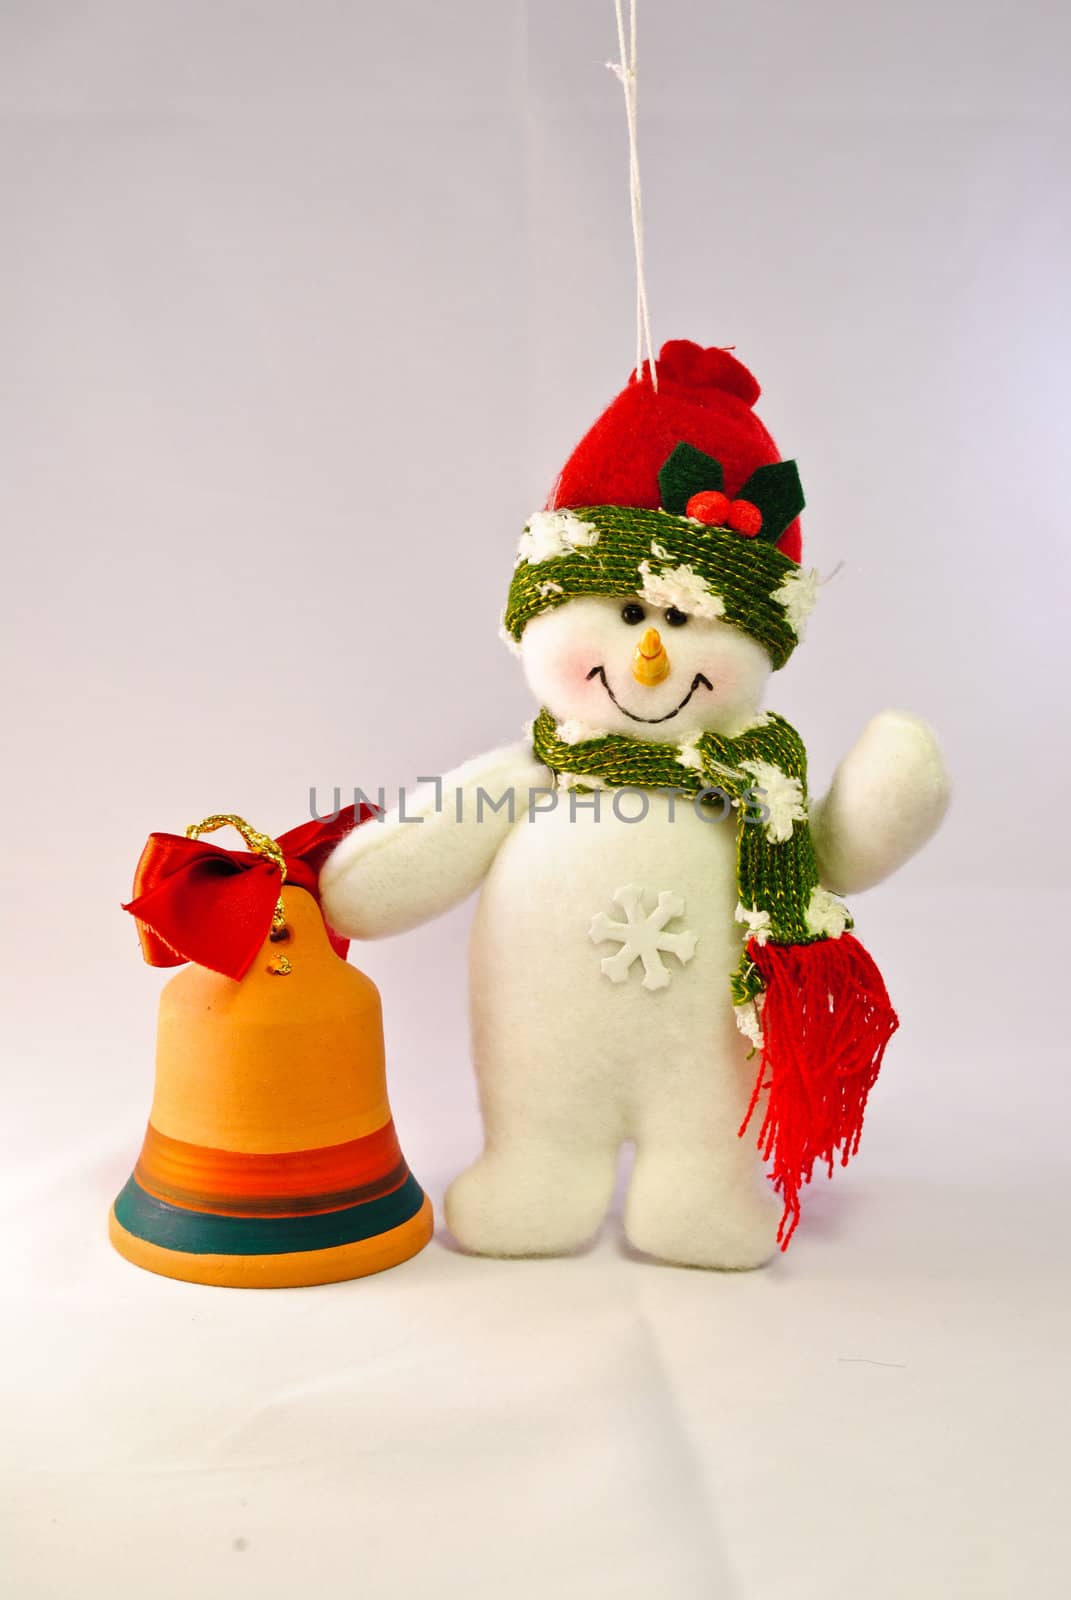 Snowman with orange bell by robertblaga